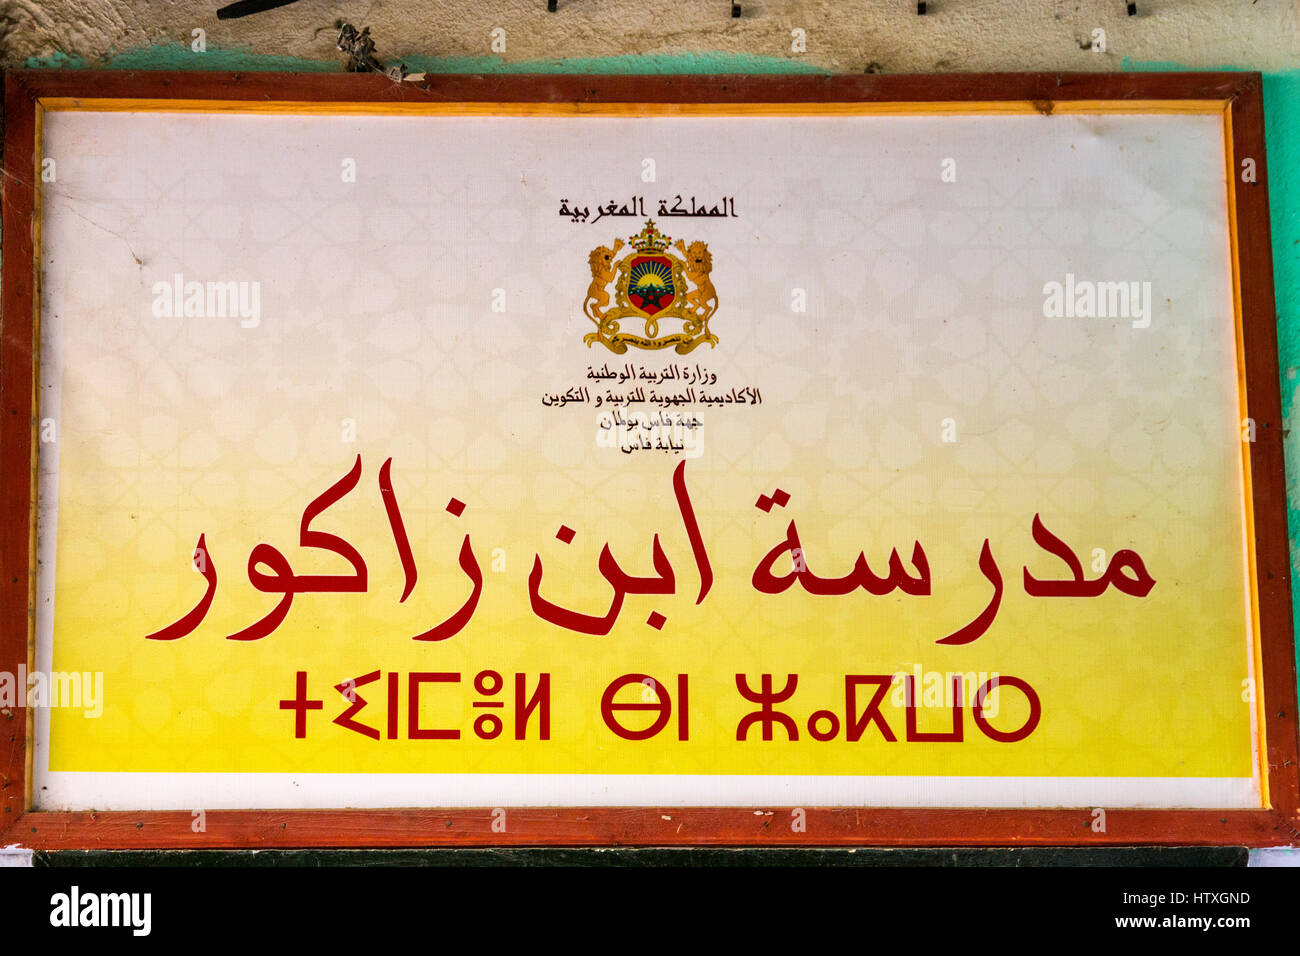 Fes, Morocco.  Bilingual Sign in Arabic and Tifinagh Alphabets, for the Madrasa Ibn Zakour. Stock Photo